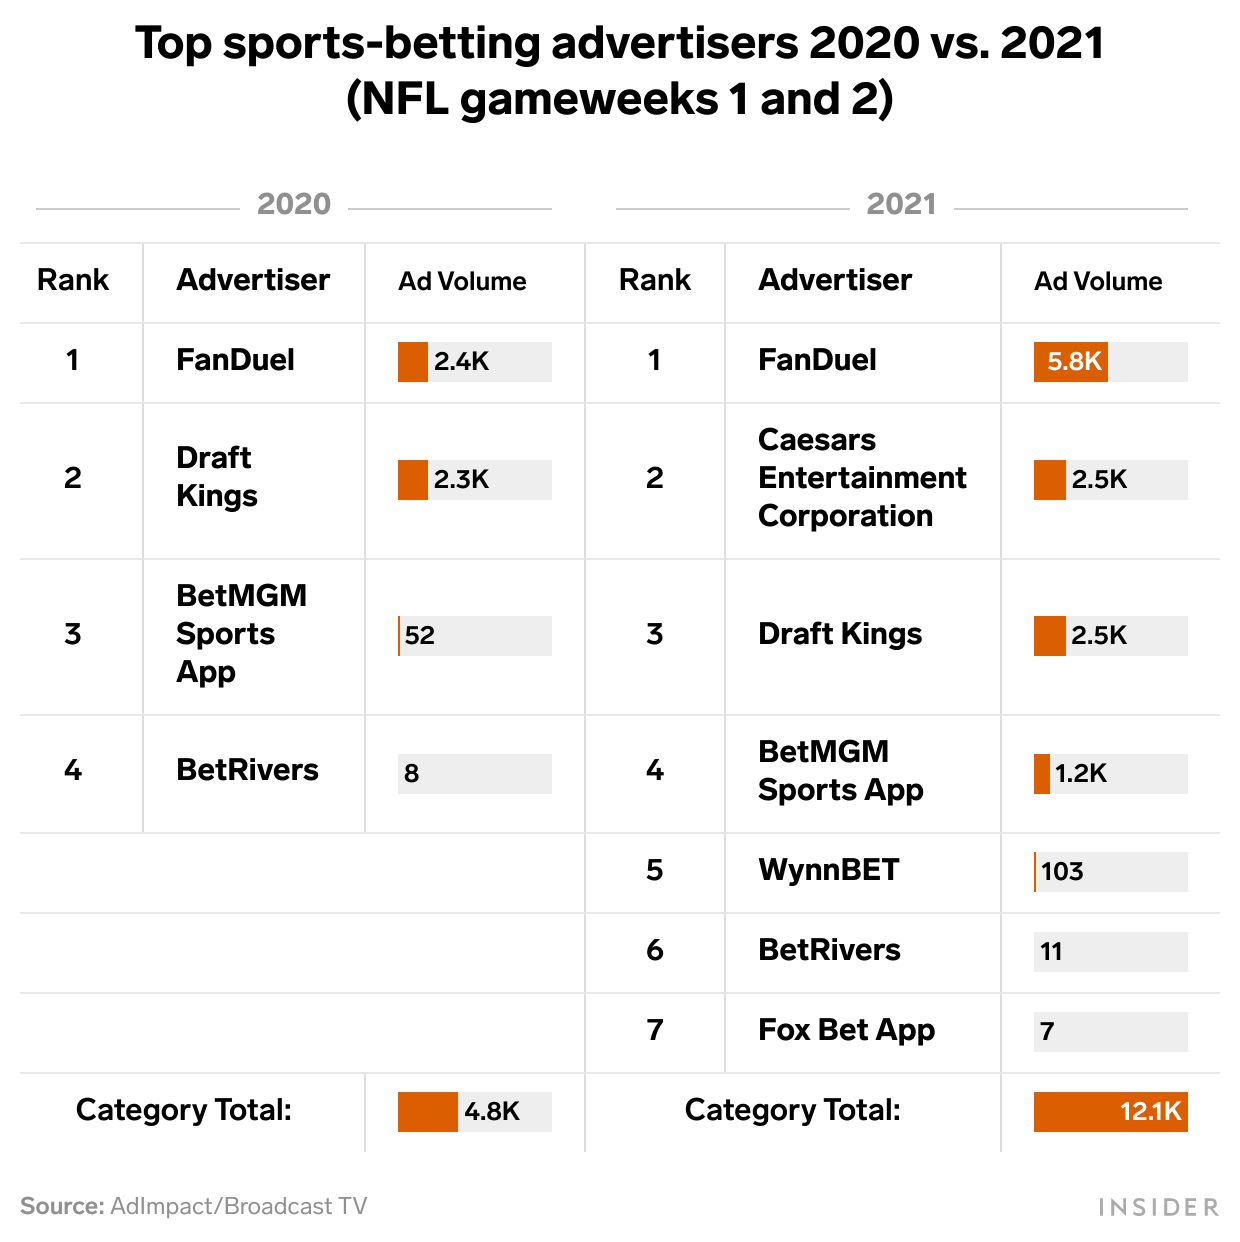 Stacked chart of top sports-betting advertisers in 2020 and 2021 of NFL game weeks 1 and 2 with advertiser FanDuel in the lead for both years, rising from 2.4K ad volume in 2020 to 5.8K ad volume in 2021